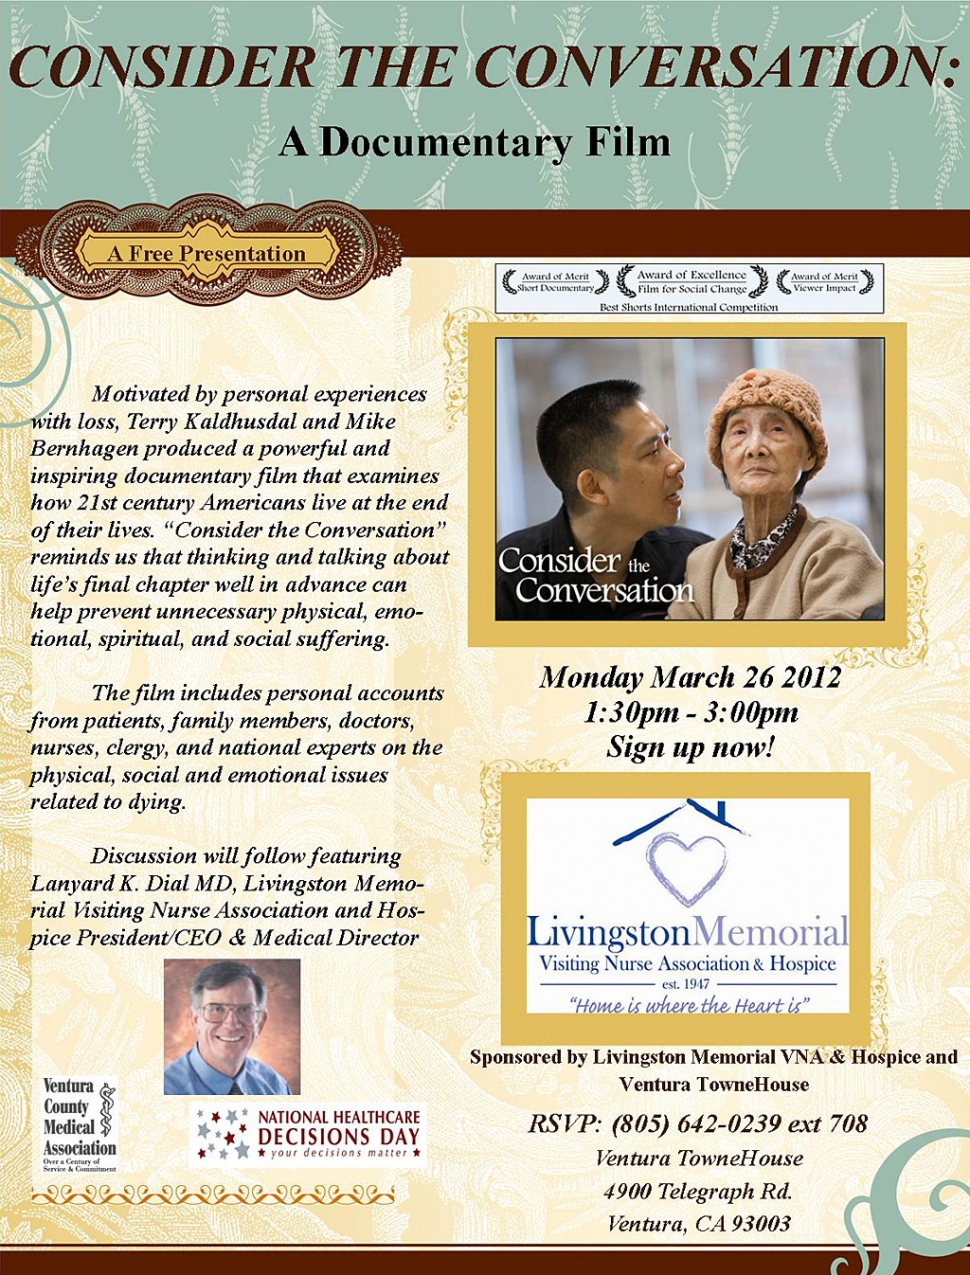 Livingston Memorial VNA & Hospice and the Ventura Towne House are sponsoring a free documentary film, “Consider the Conversation”.  This powerful film reminds us that talking about life’s final chapter well in advance can help prevent unnecessary physical, emotional, spiritual and social suffering. A discussion will follow featuring Lanyard K. Dial, MD, Livingston’s President/CEO and Medical Director. The date is March 26th, from 1:30 – 3:00 pm @ The Towne House, 4900 Telegraph Rd, Ventura.  RSVP to 642-0239 ext 708.